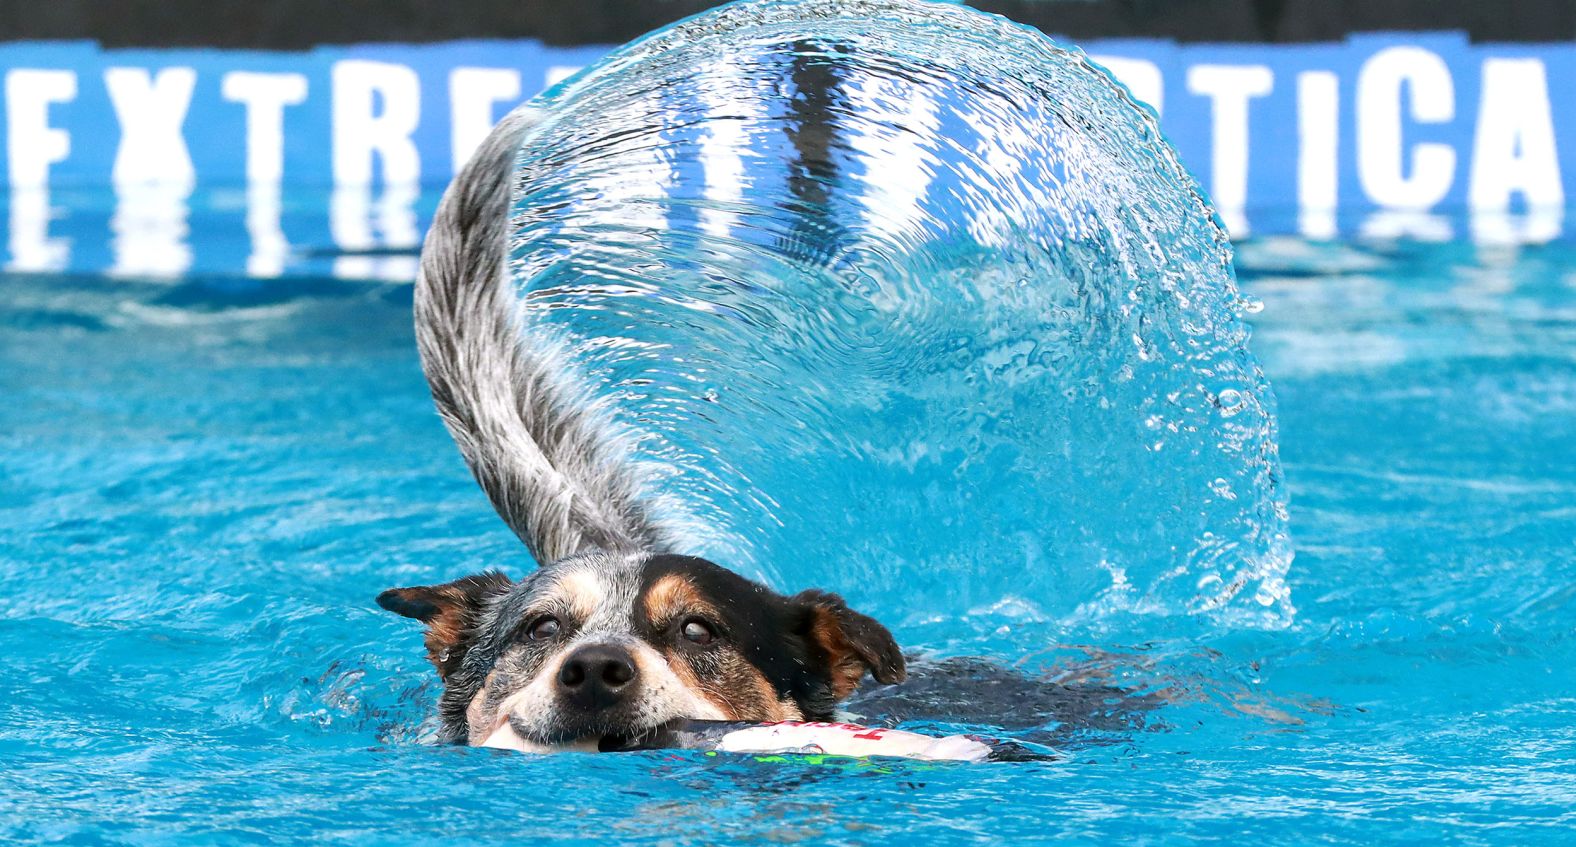 A dog retrieves a toy during a competition at the NC Pet Expo in Raleigh, North Carolina, on Saturday, August 6.